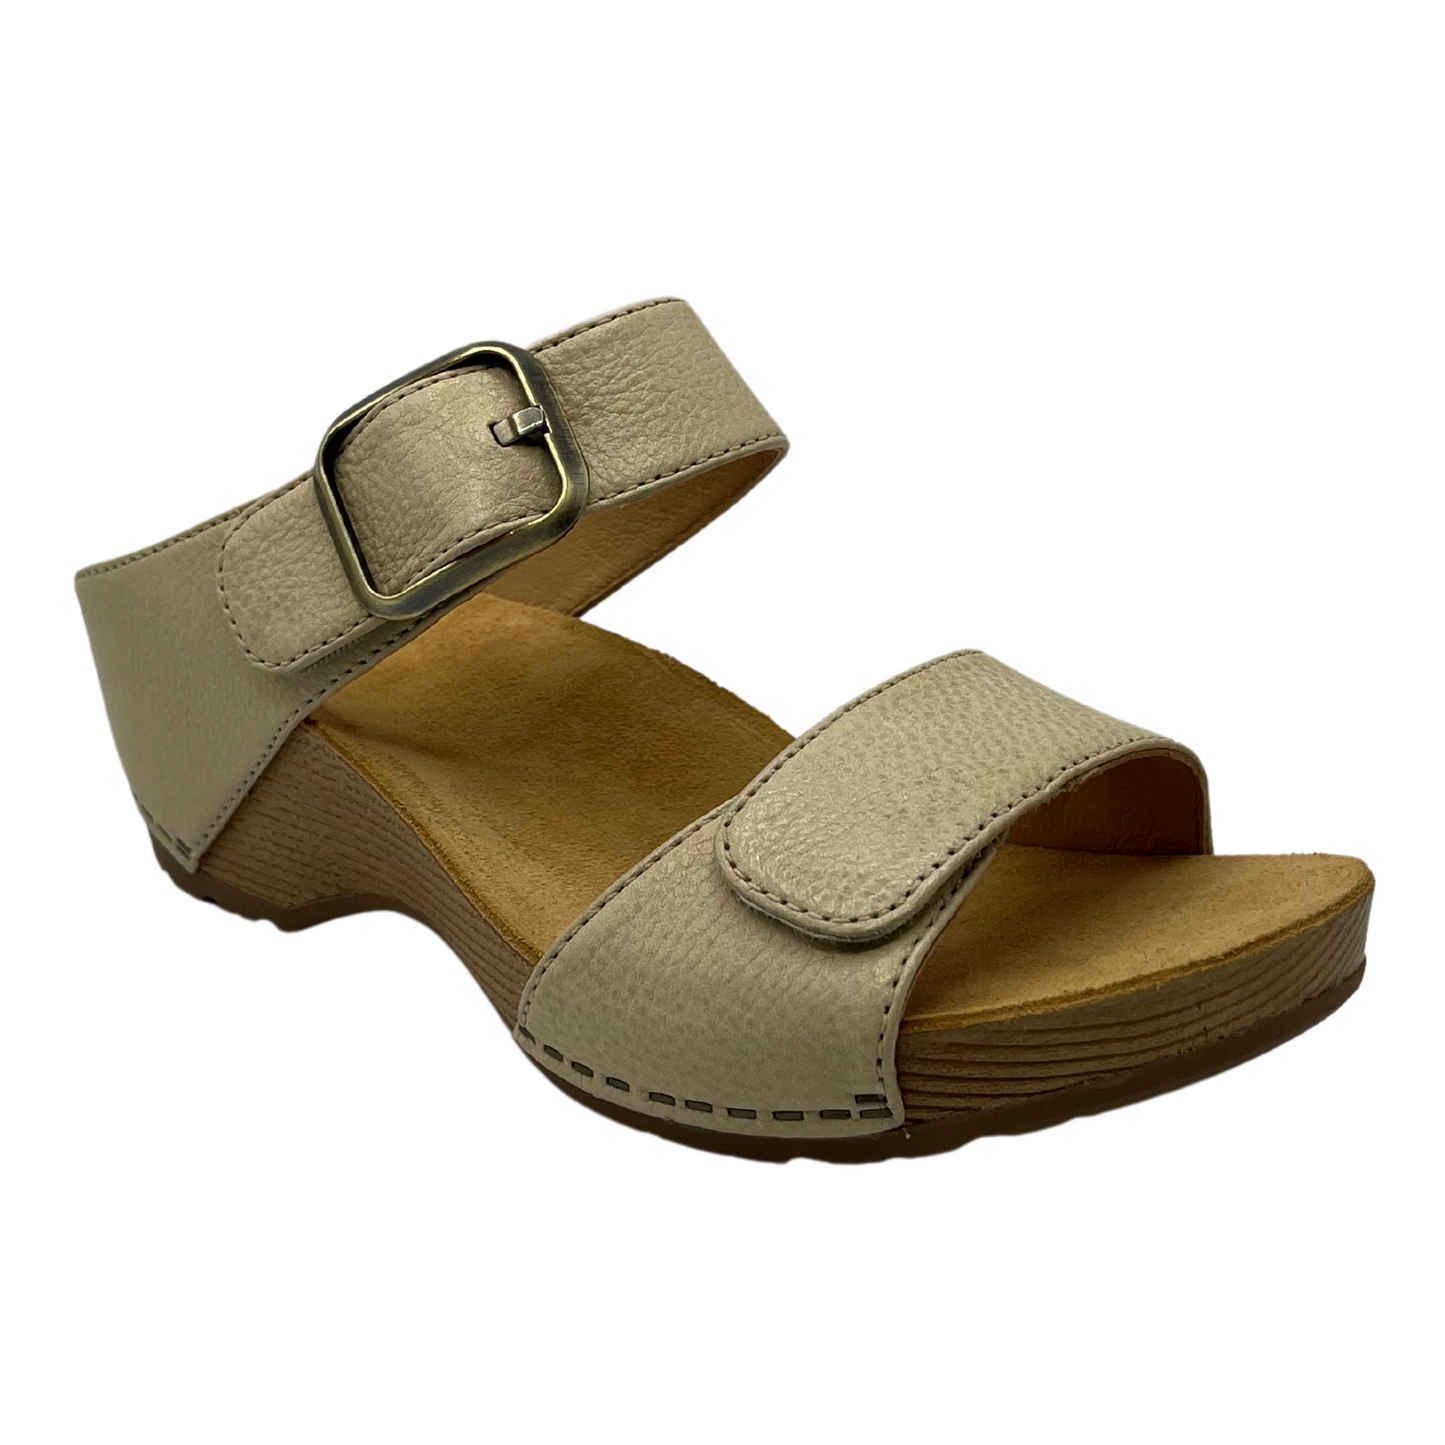 45 degree angled view of linen leather sandal with chunky sole and gold buckle